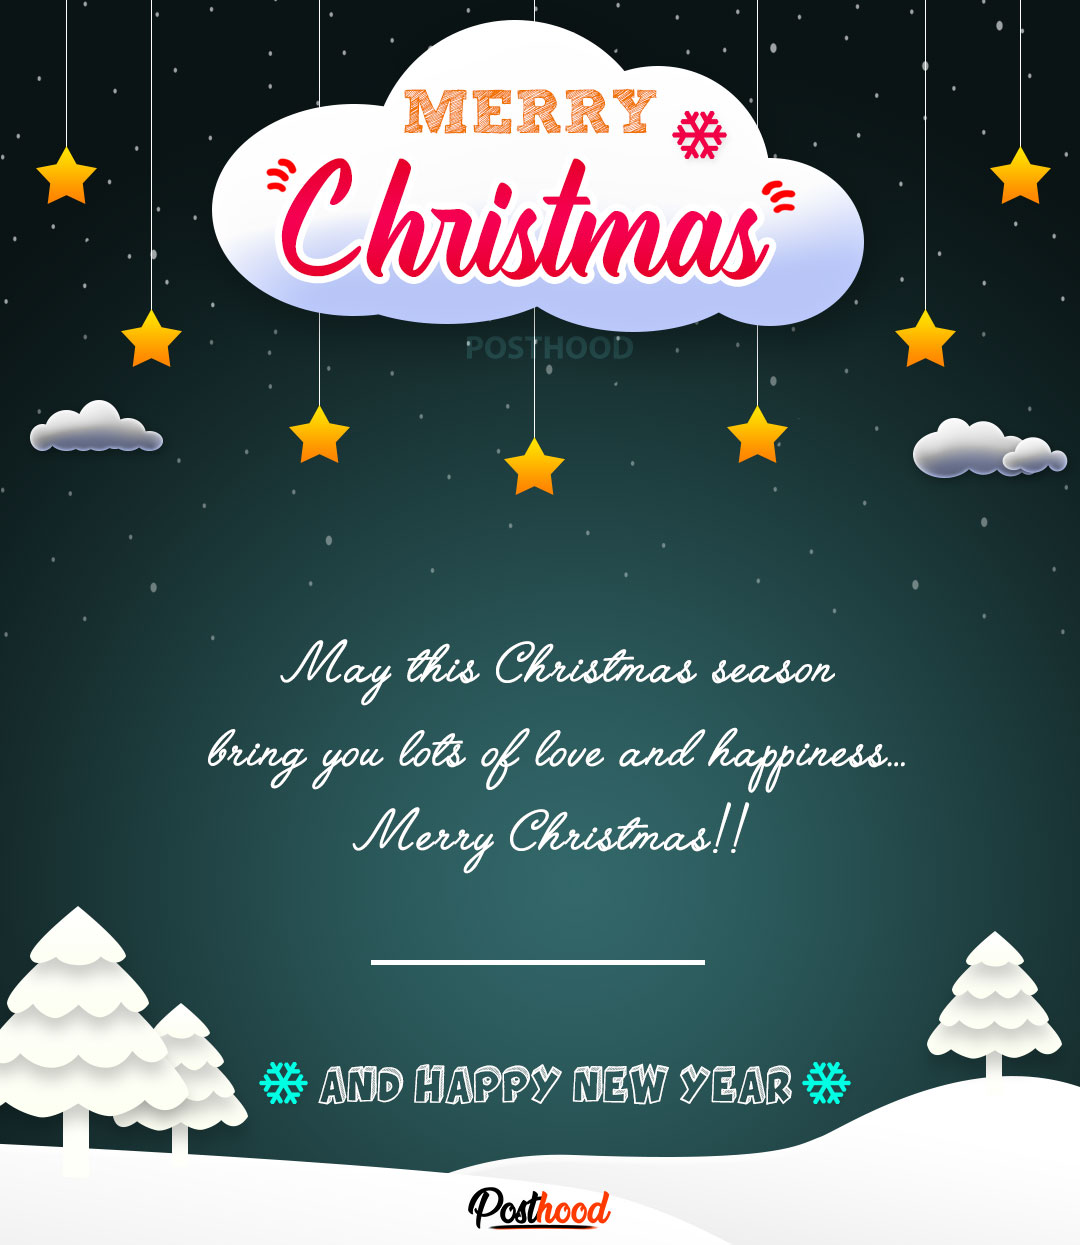 These 25 cute Christmas messages to wish your loved one will fills their hearts with love. Wish them Merry Christmas and New Year in advance. 